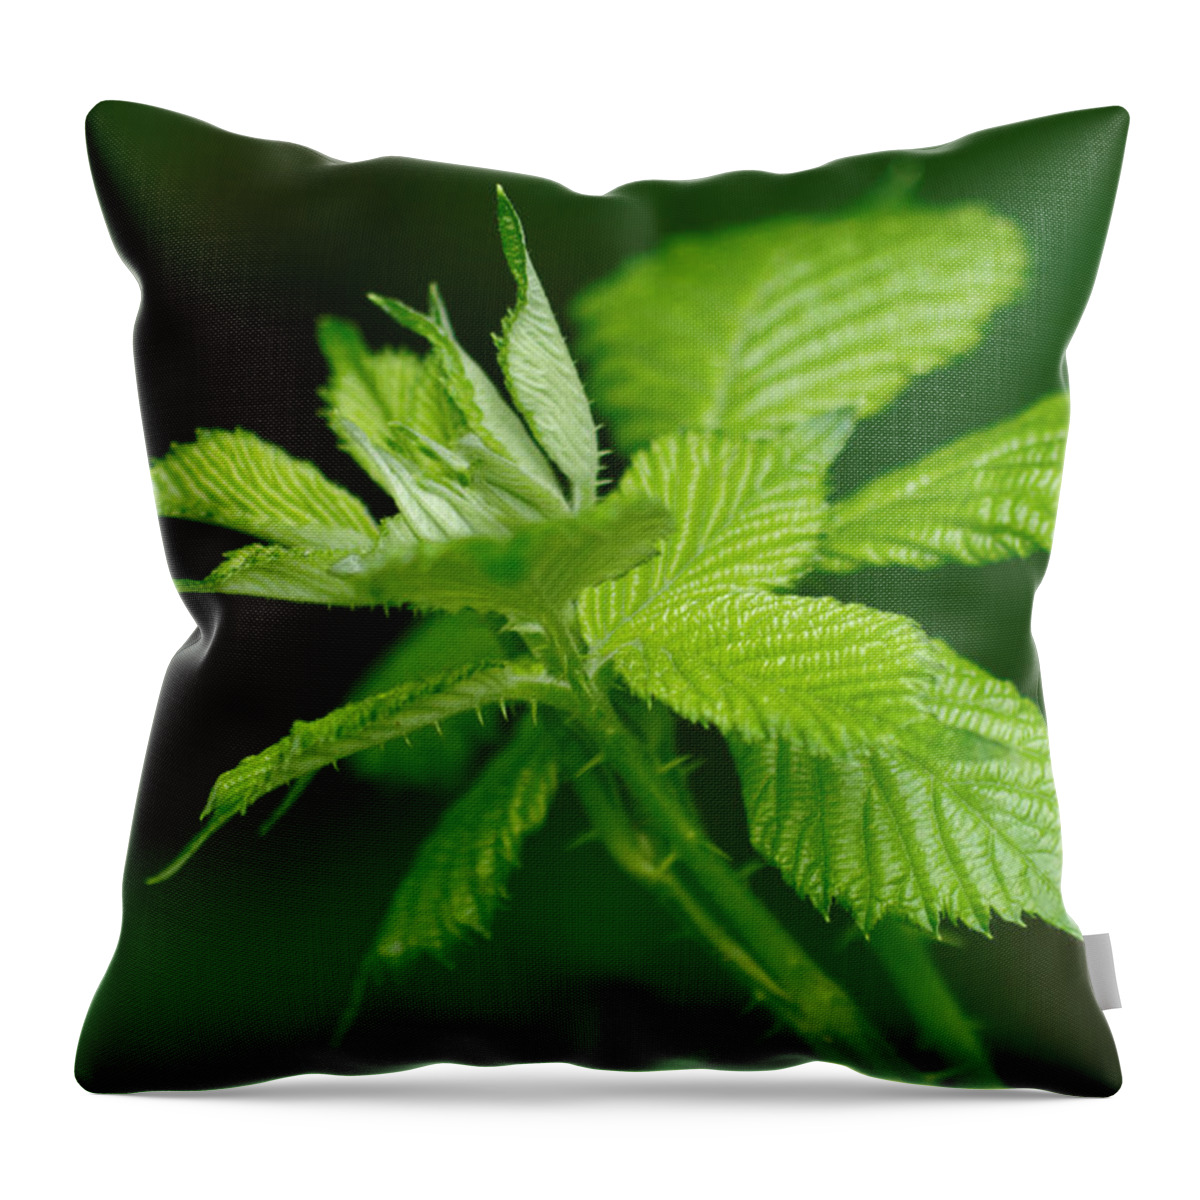 Green Throw Pillow featuring the photograph Green by Hartmut Knisel